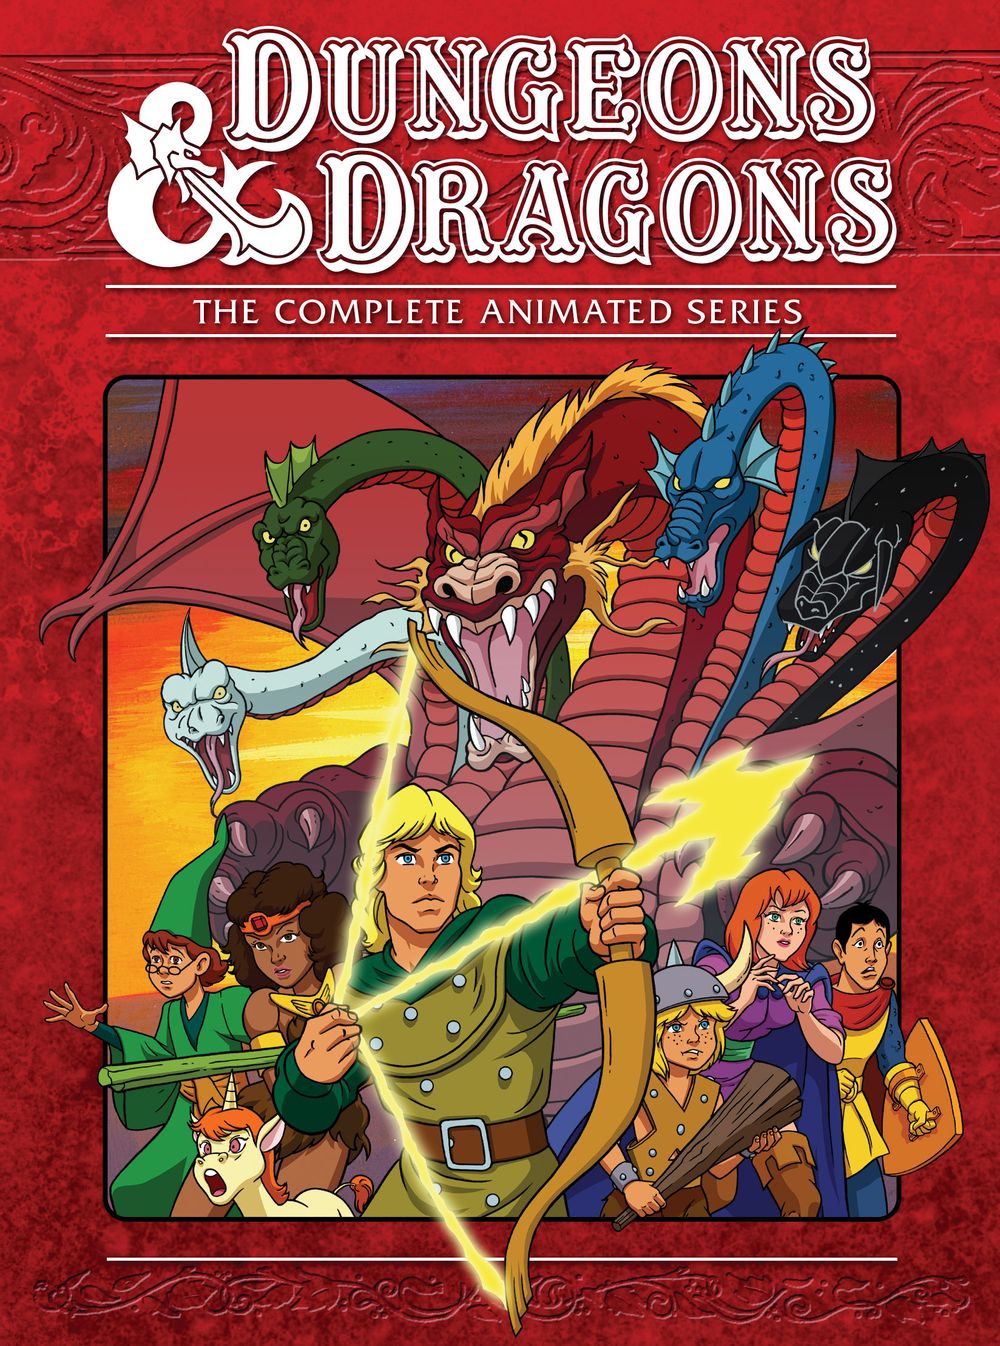 Dungeons & Dragons (1983) (Western Animation) - TV Tropes